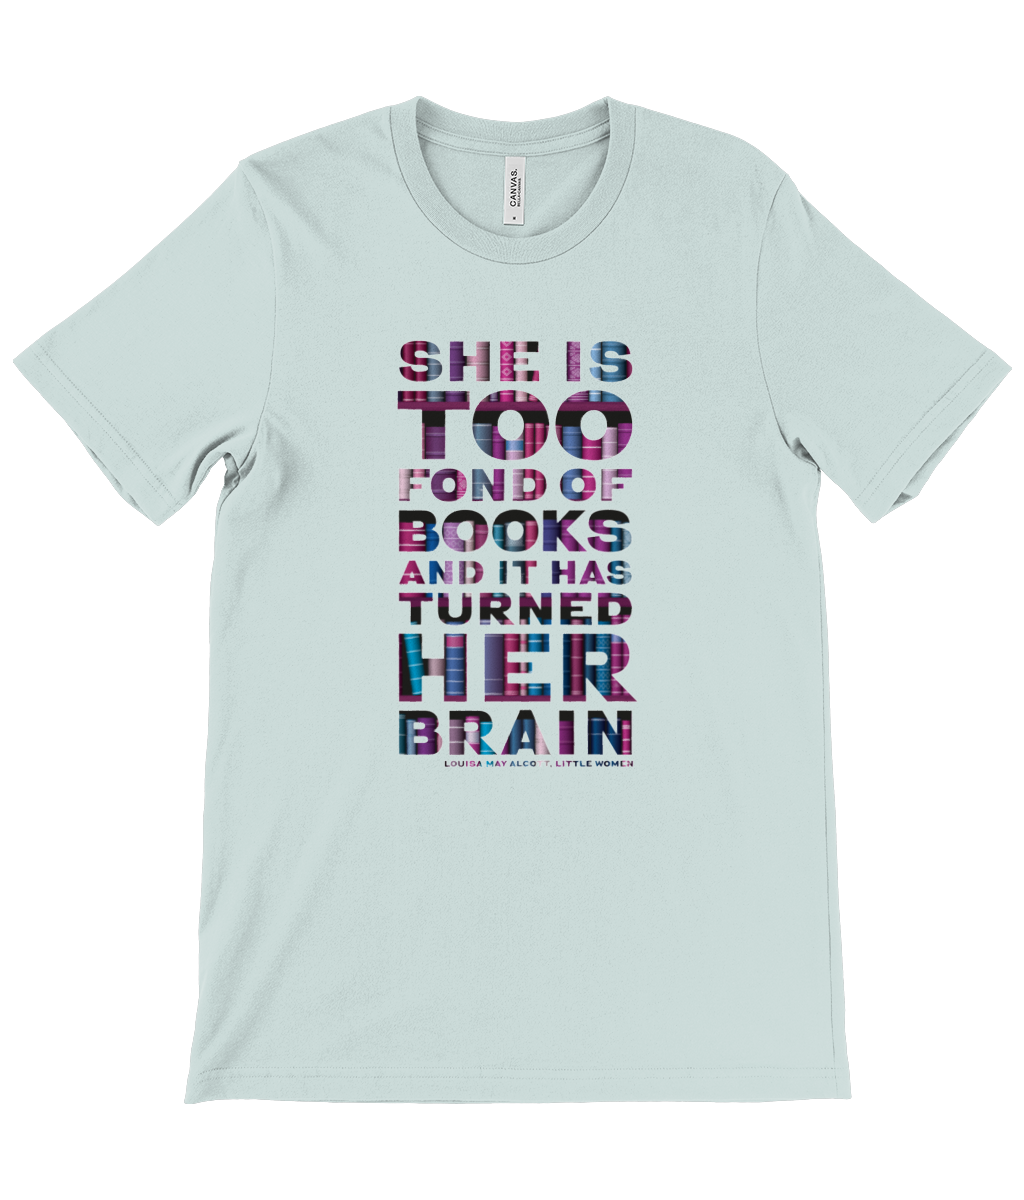 Unisex t-shirt "She is too fond of Books it has turned her brain" Book lover gift, librarian gift, bookworm, book nerd